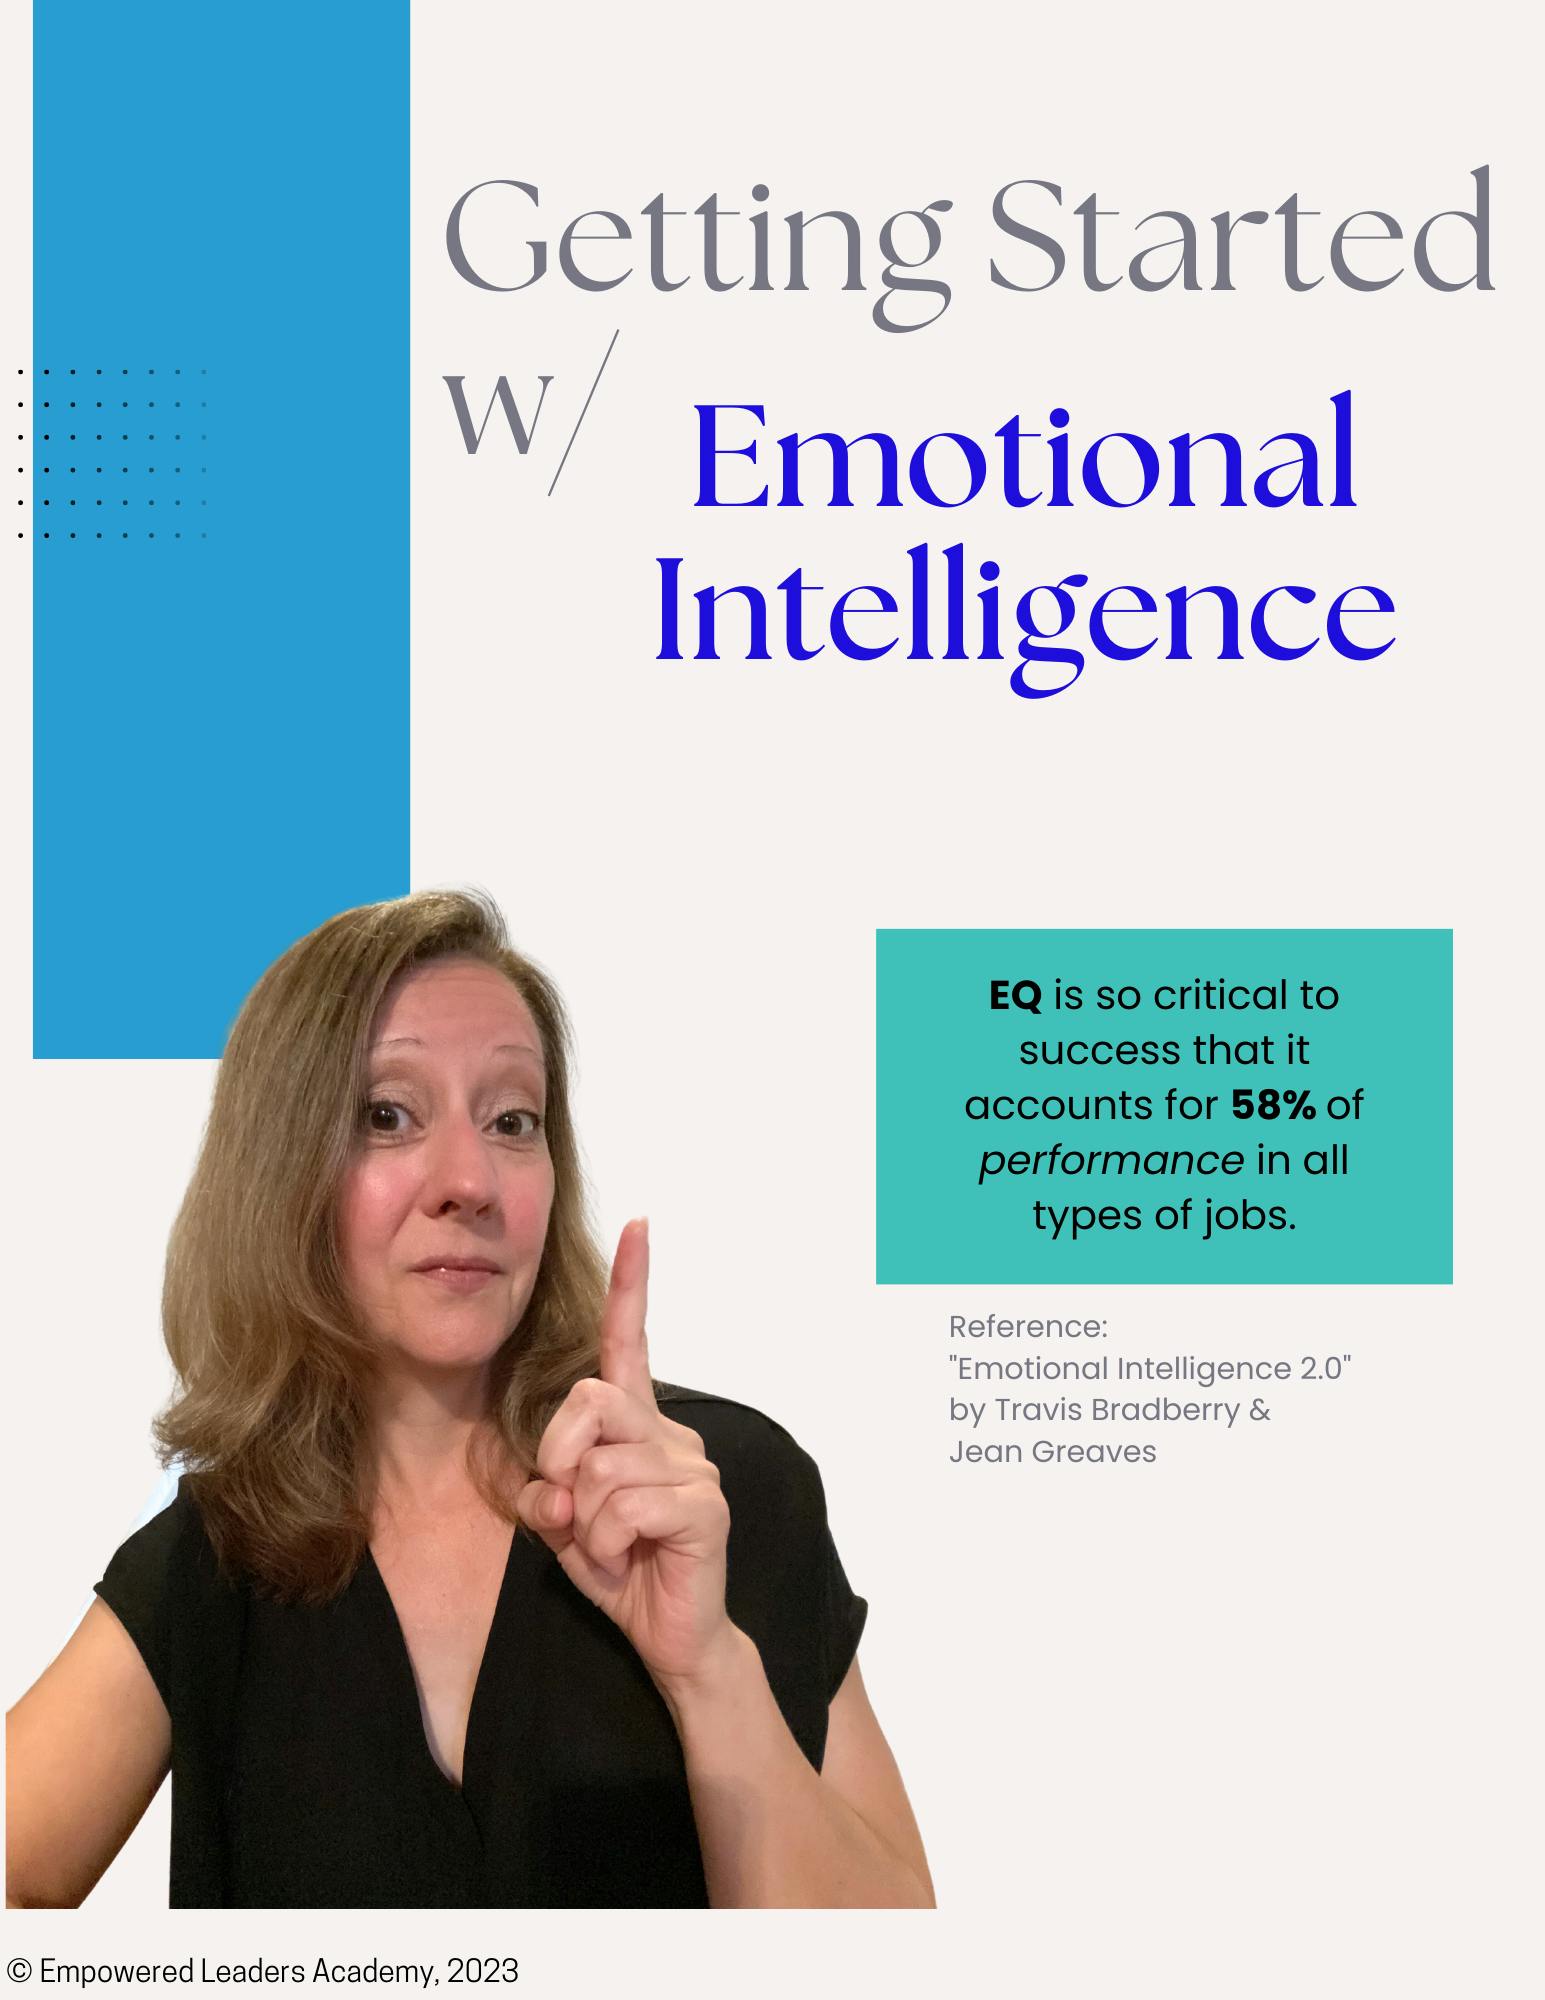 Page 1 of Stephanie's free "Getting Started with Emotional Intelligence" PDF.